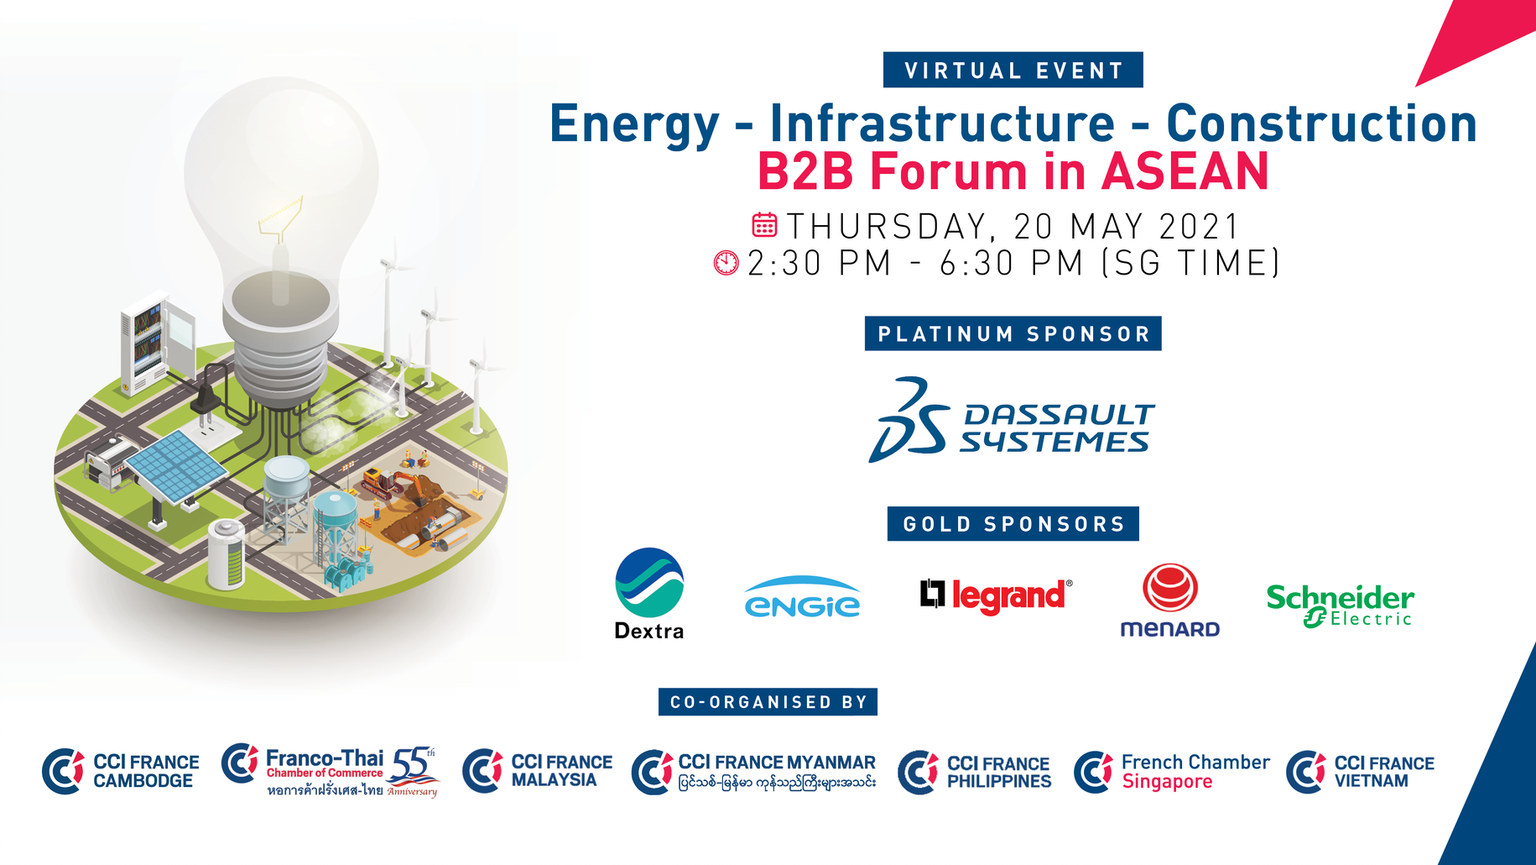 Energy Infrastructure Construction B2B Forum in ASEAN  – 20 May 2021